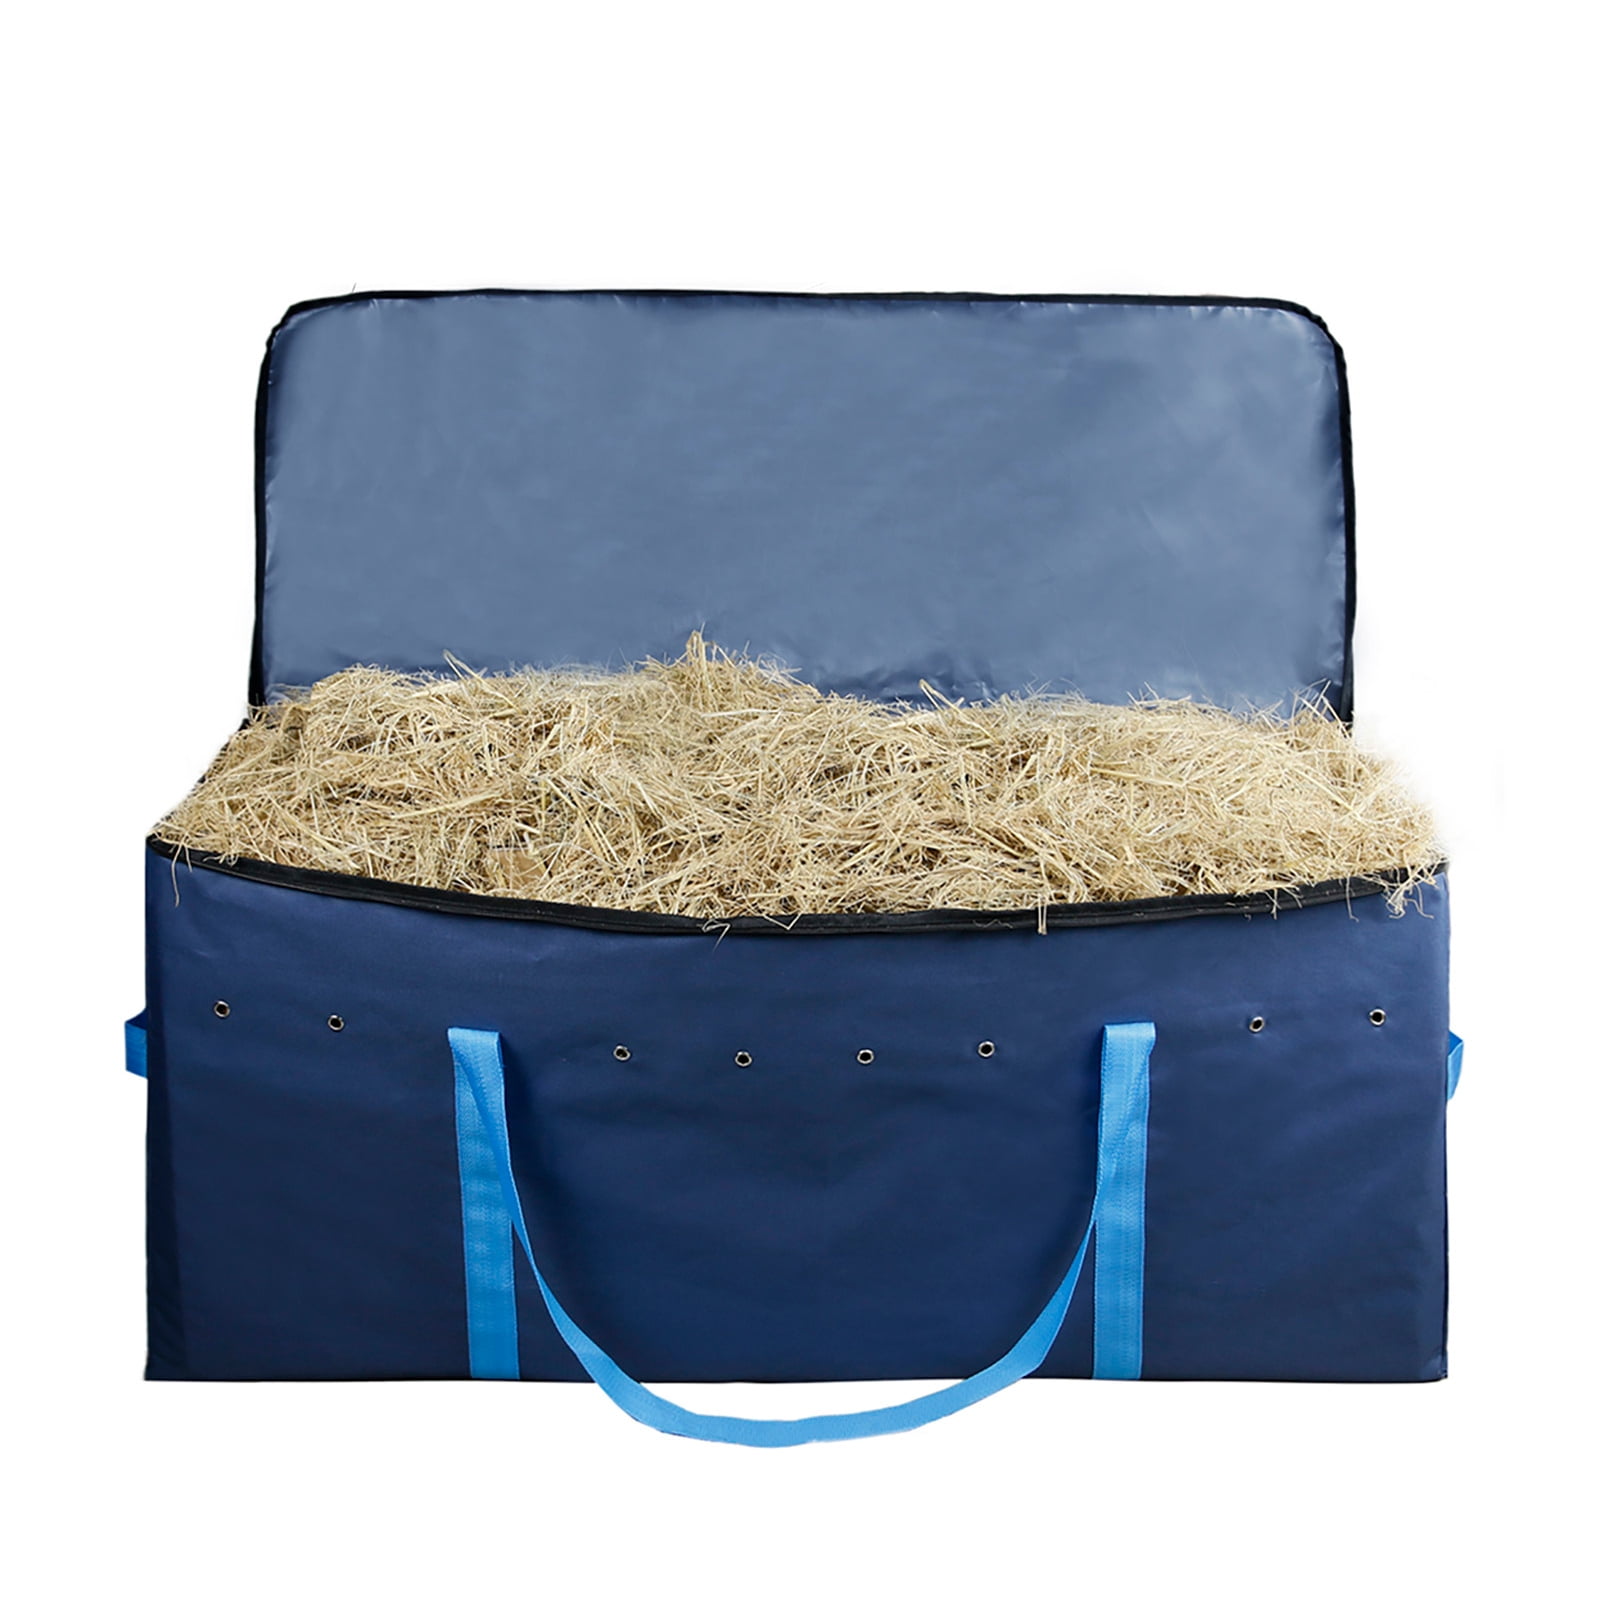 Extra Large Tote Hay Bale Carry Bag,Heavy Duty Hay Bale Bags with Zipper for Horses Cows Cattle Sheep Goats,Also Suitable for Christmas Tree Storage Hay Bale Storage Bag 